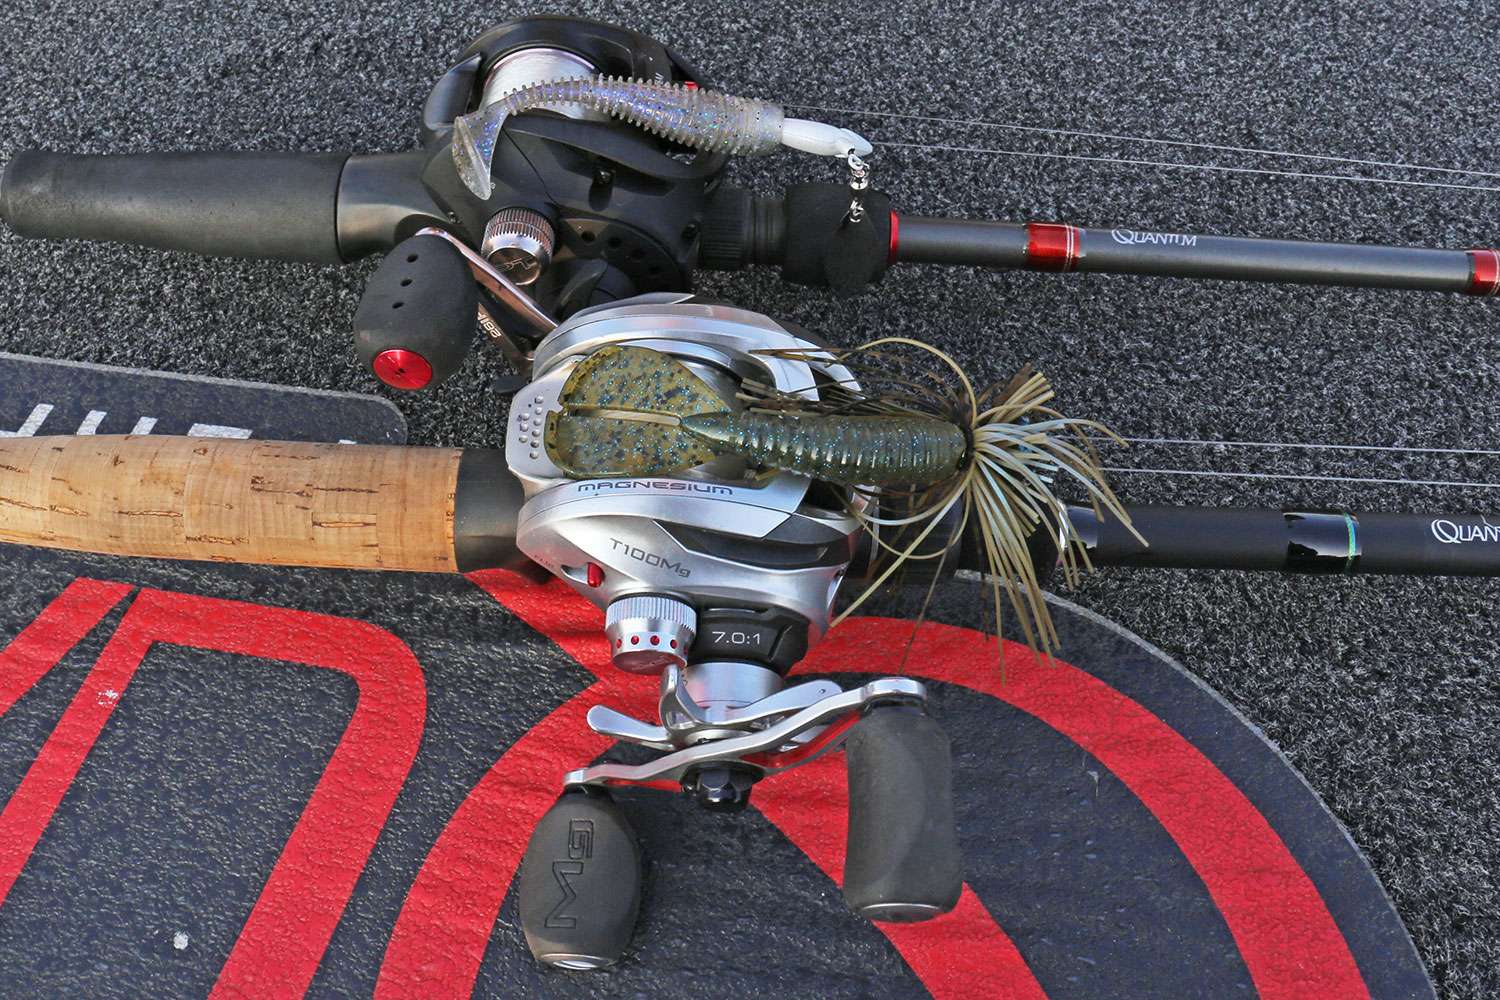 A 1/2-ounce finesse jig with a 4-inch Strike King Rage Twin Menace Grub was a key choice. So was a 1/2-ounce underspin with a 3.75-inch Strike King Rage Swimmer for a trailer. 